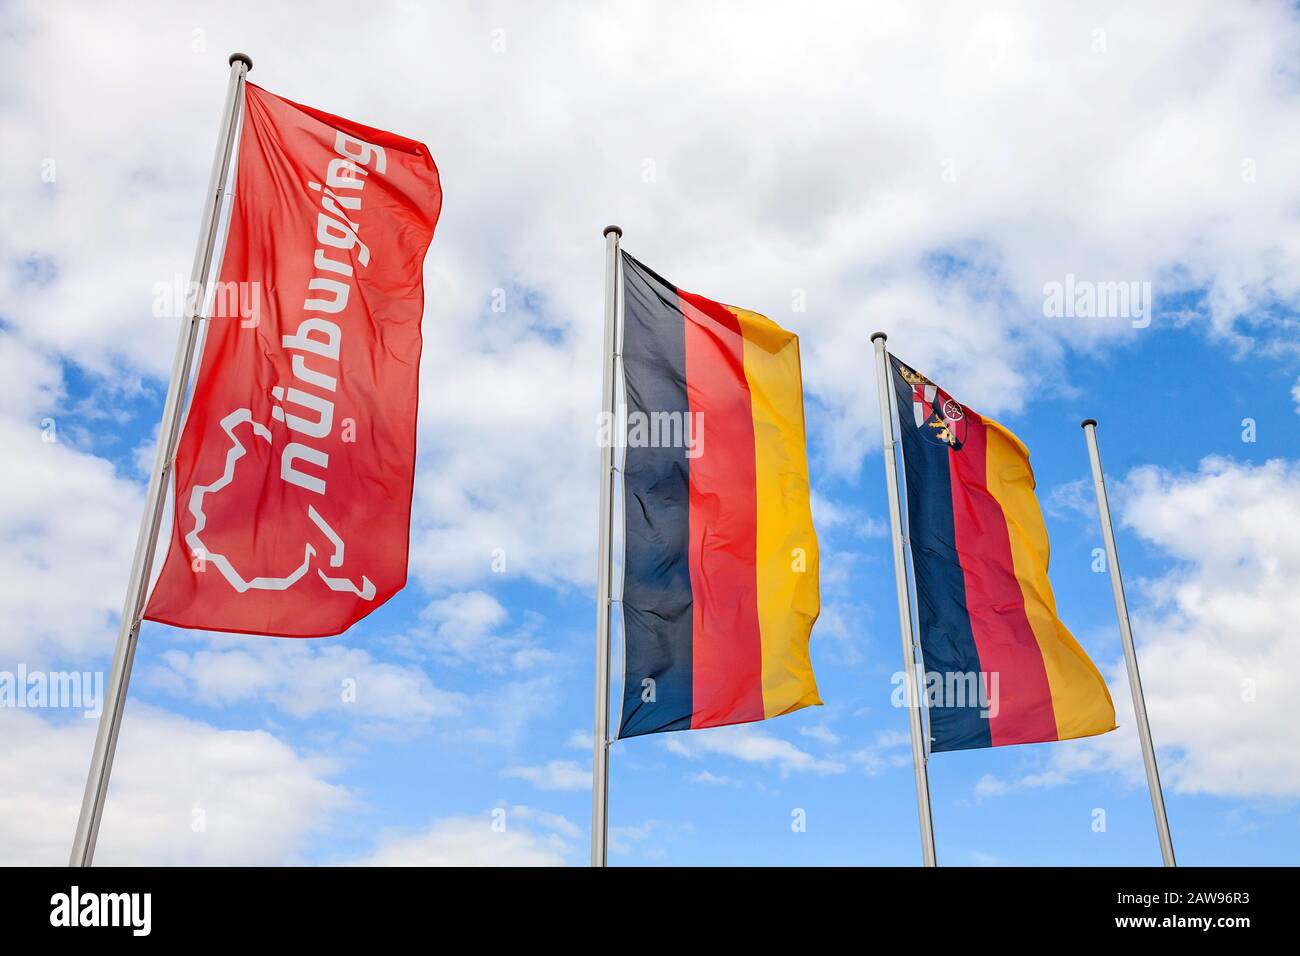 Nurburg, Germany - May 20, 2017: Flag at race track Nurburgring, labeled with 'Nurburgring' and logo, two german flags at pole Stock Photo